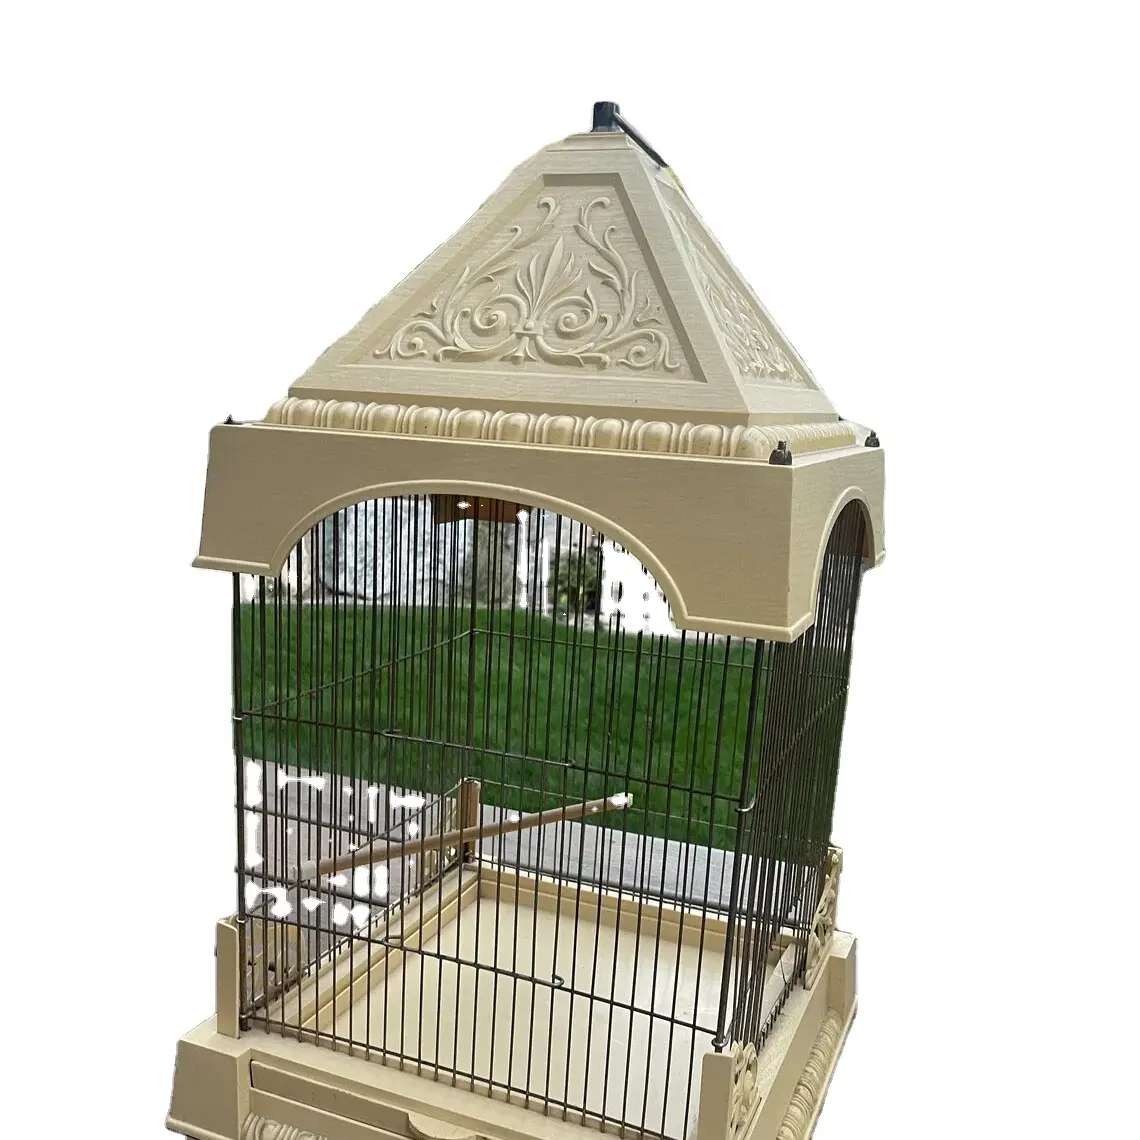 Victorian Style Bird Cage Hanging High Wide Square Ornate Vintage Decorative Antique Bird Cage Music Box decorative plant hold